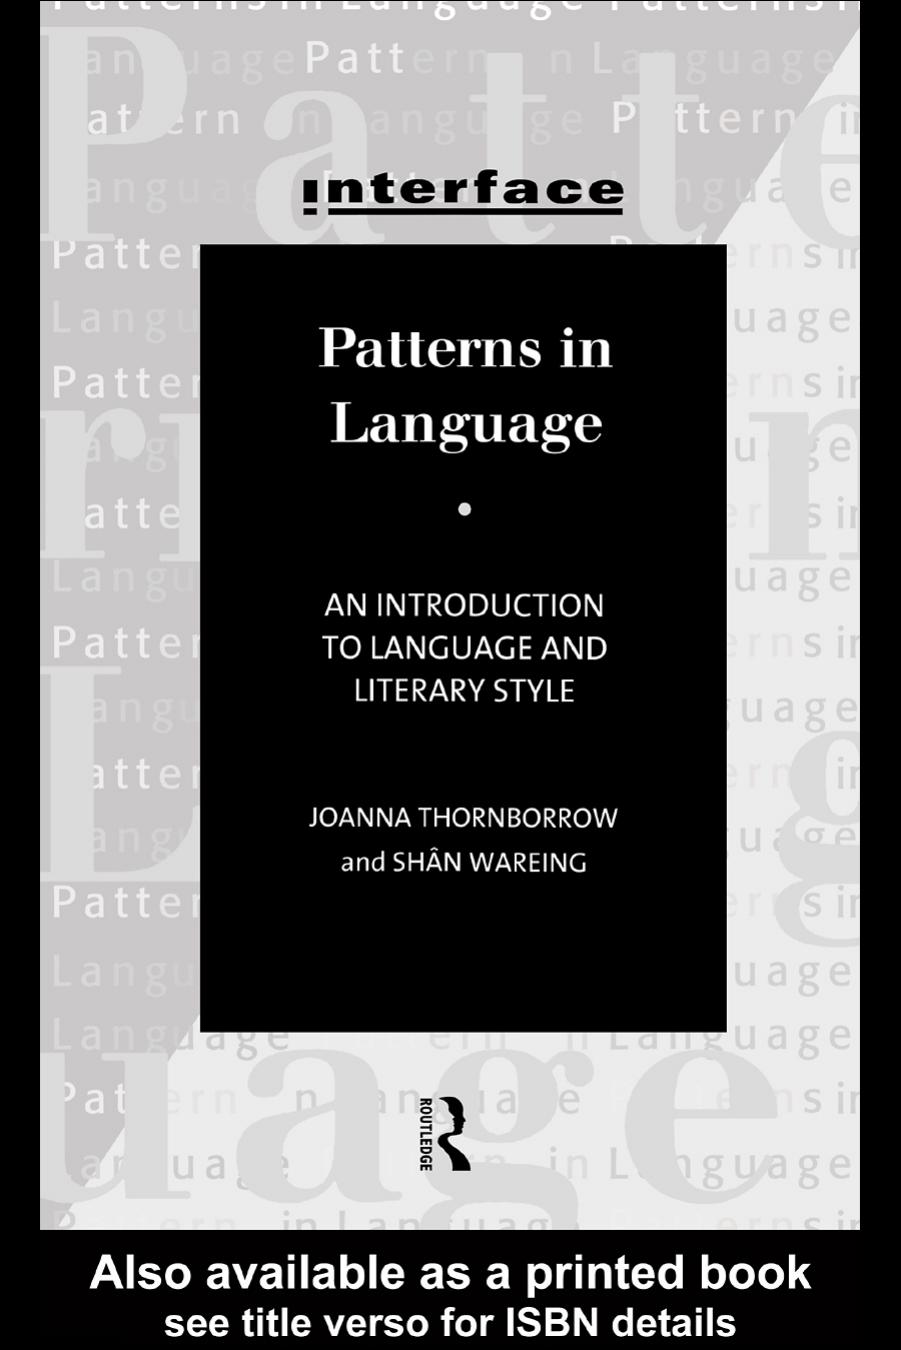 Patterns in Language: An Introduction to Language and Literary Style